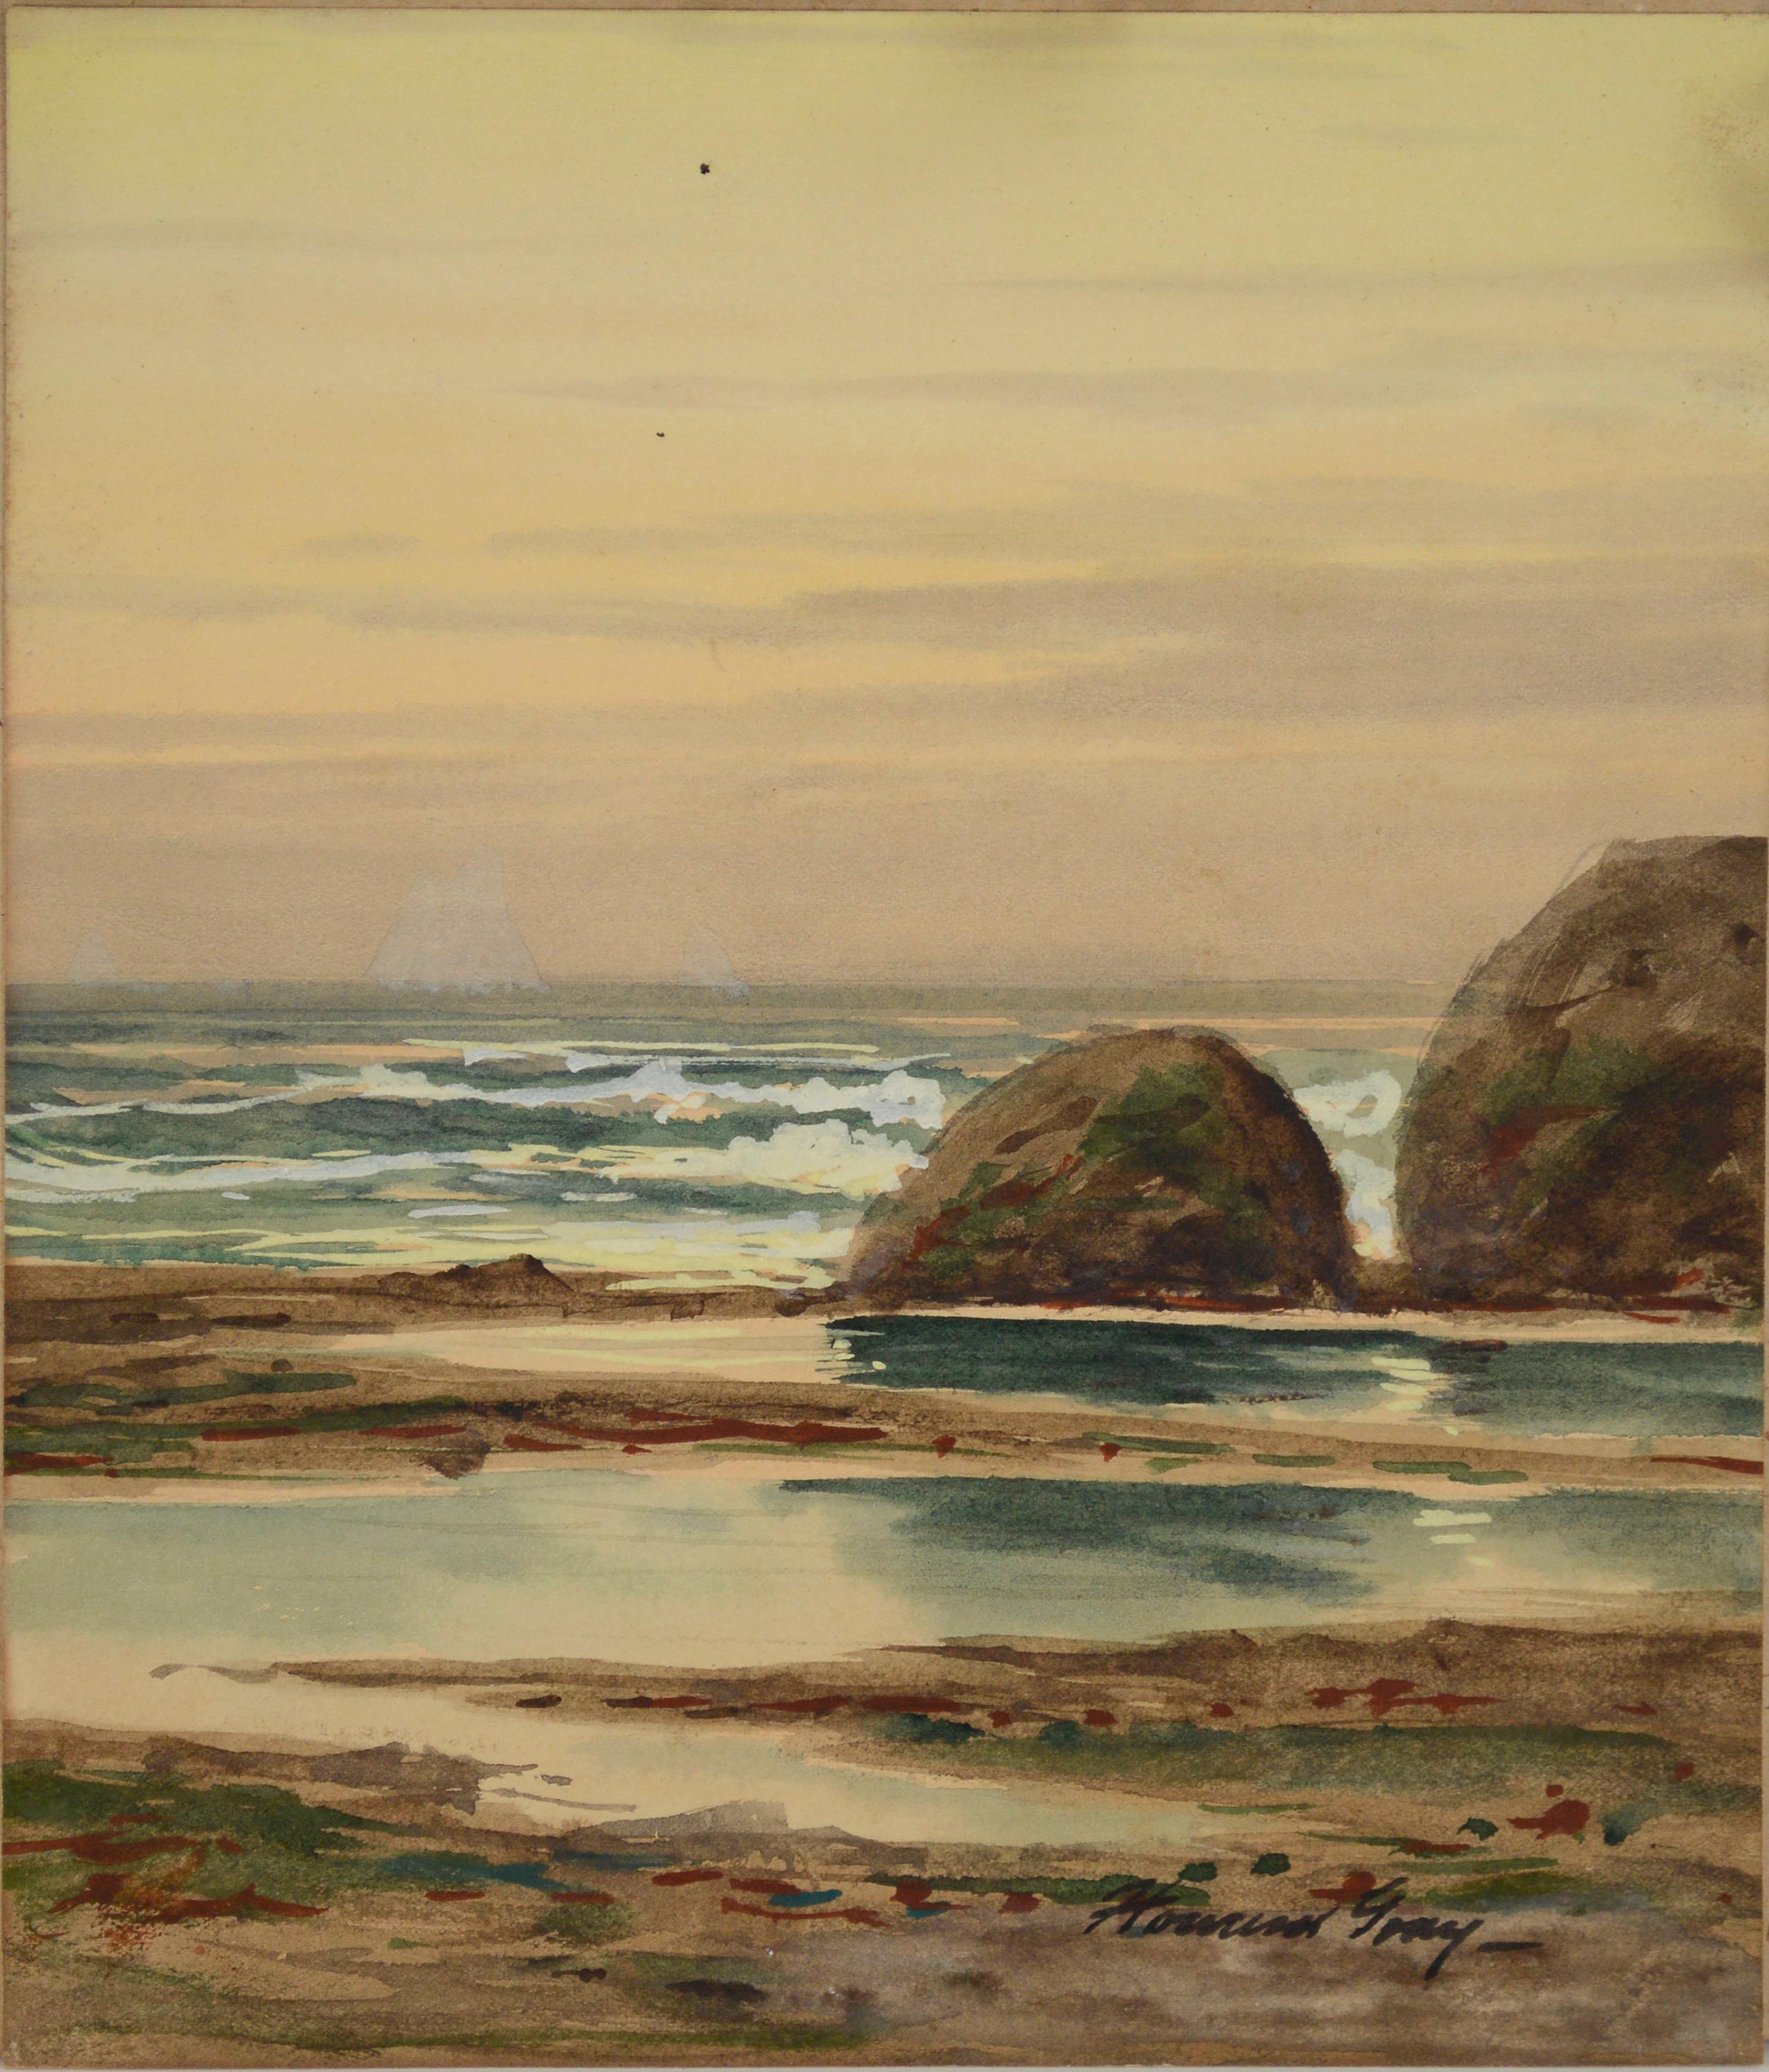 Schooners on the Coast with Rocks Tide Pools and bird by Howard Garfield Gray
Schooners in the mist by artist and illustrator Howard Garfield Gray (American, 19th-20th C). Watercolor on paper in very good condition with normal age toning (slight